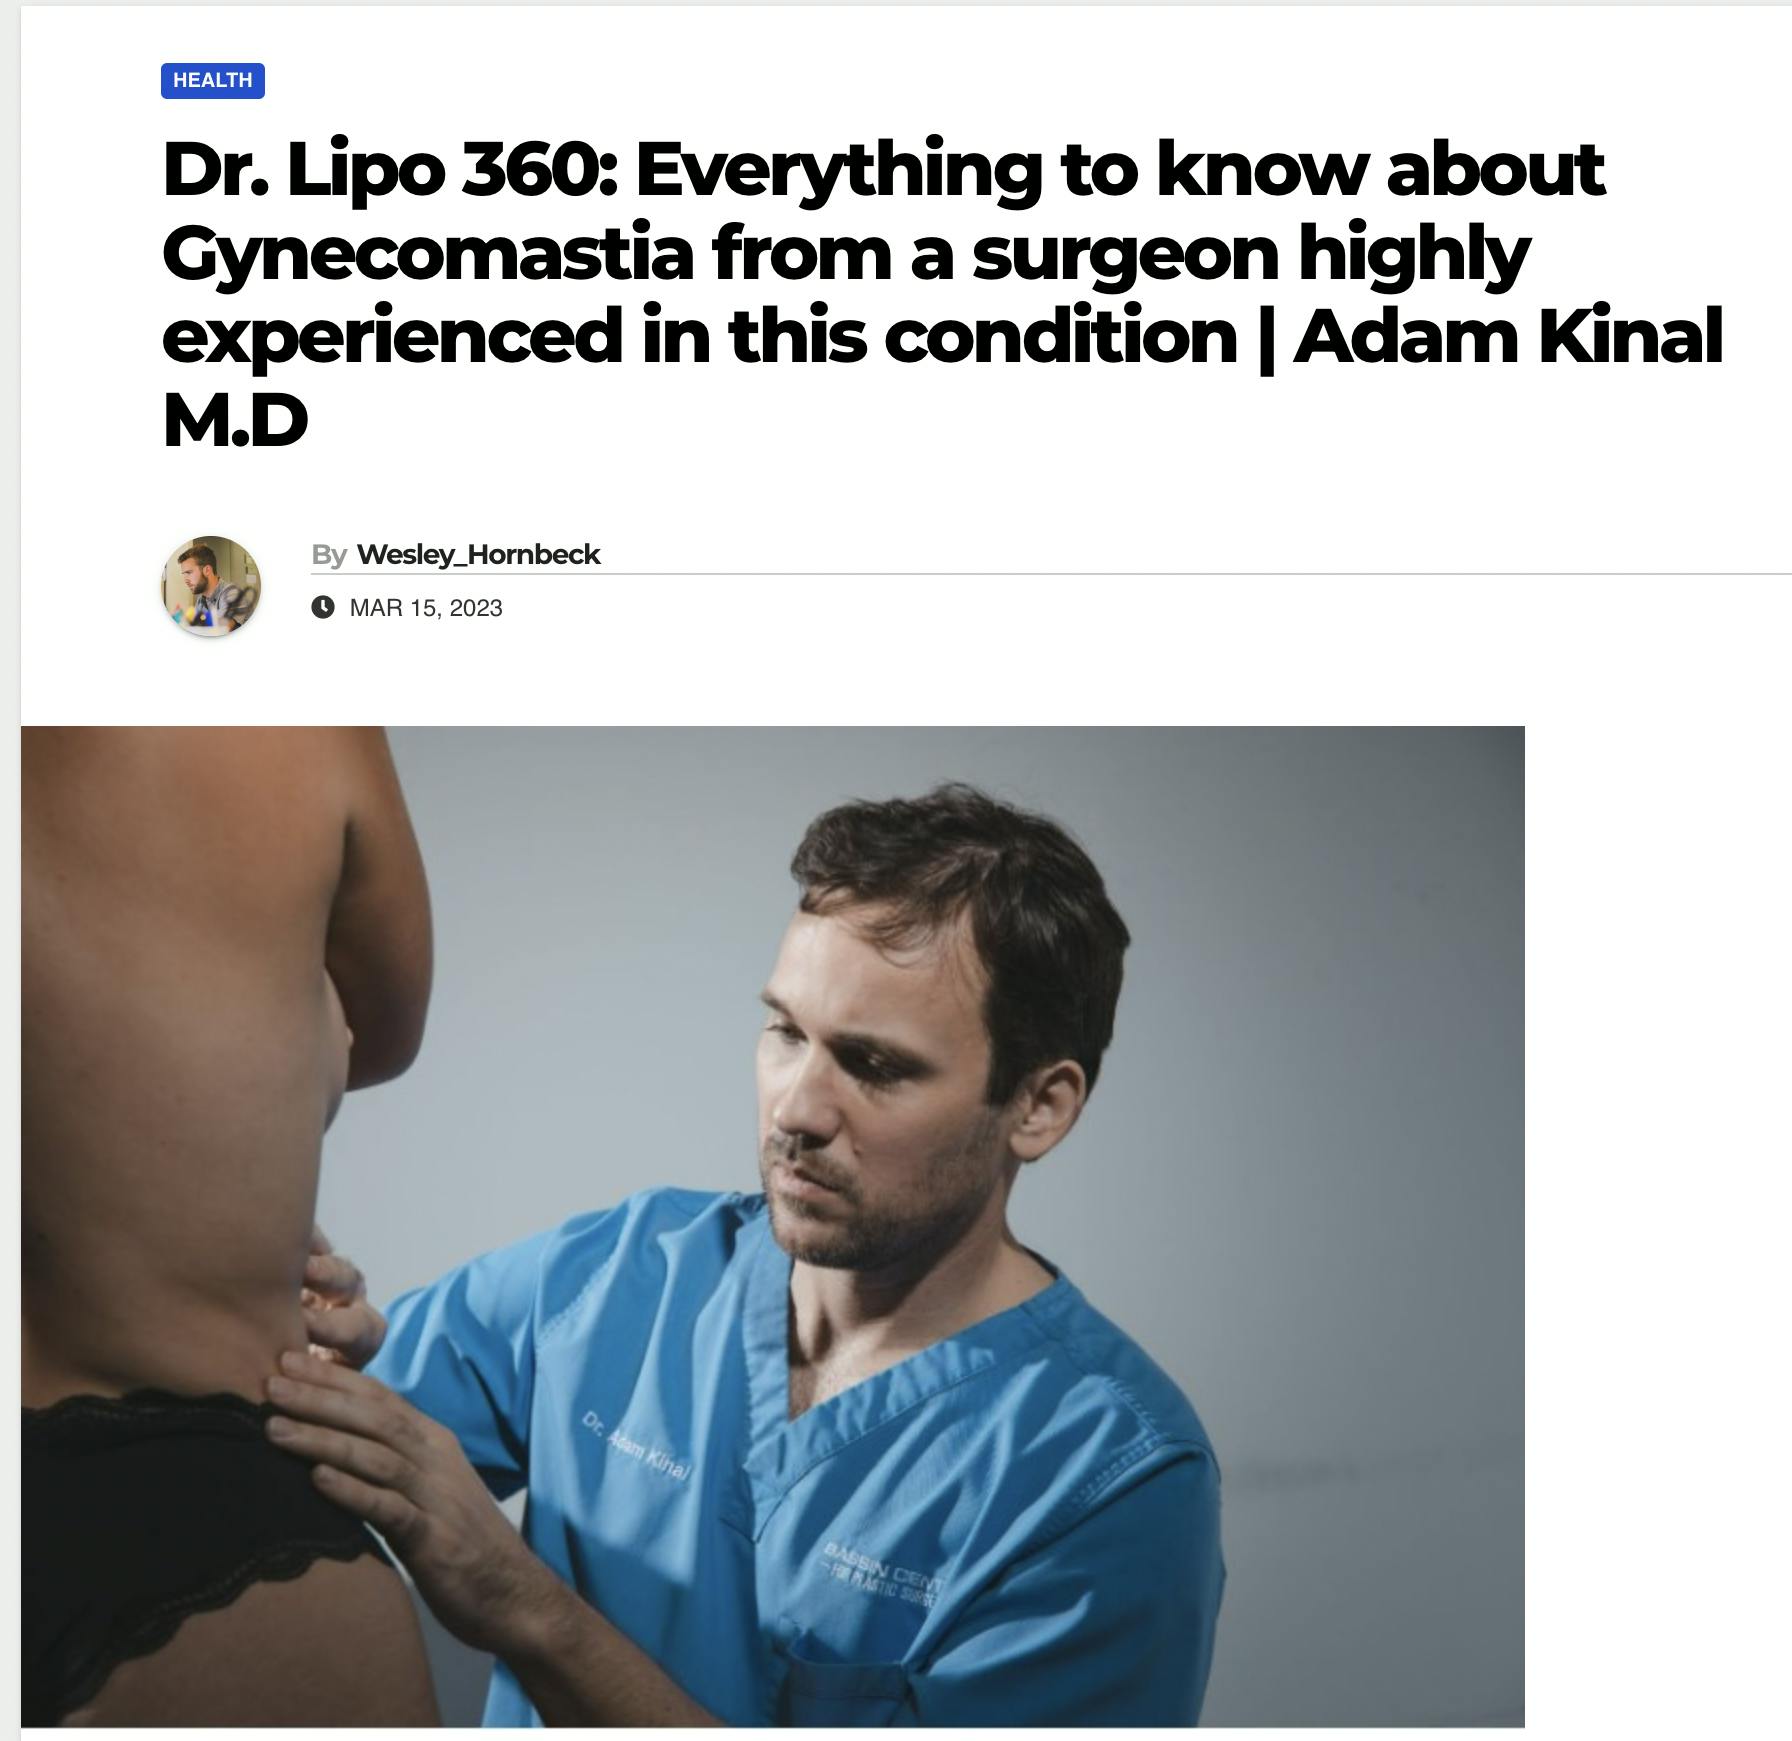 Dr. Lipo 360: Everything to know about Gynecomastia from a surgeon highly experienced in this condition